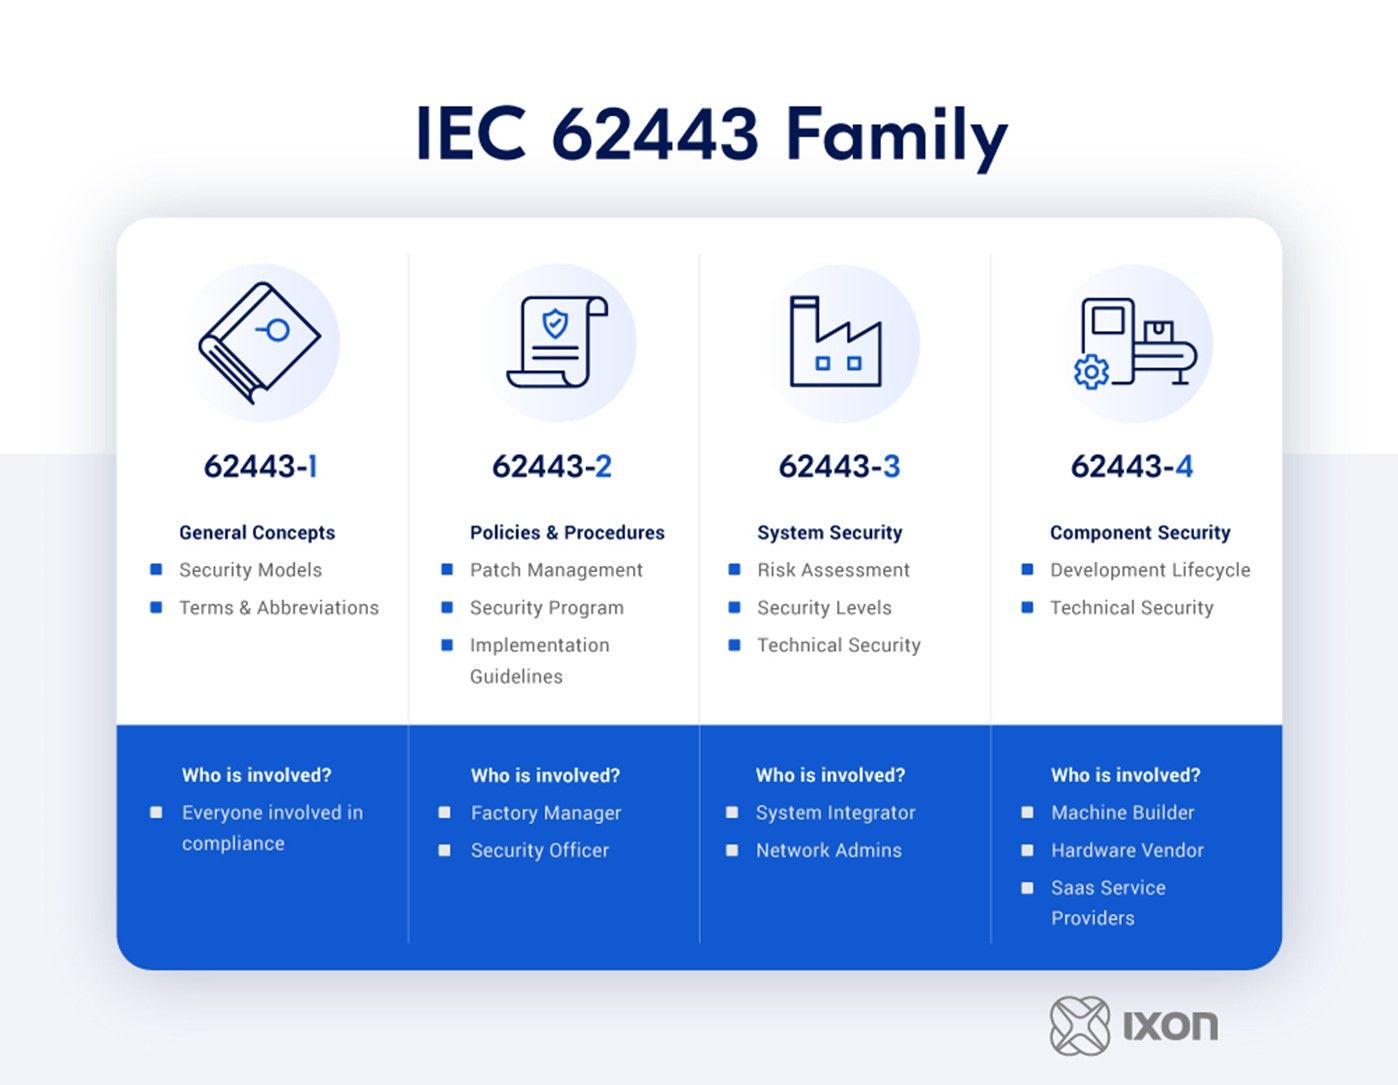 IXON’s IEC 62443 conformance supports machine builders in their IT/OT cyber security